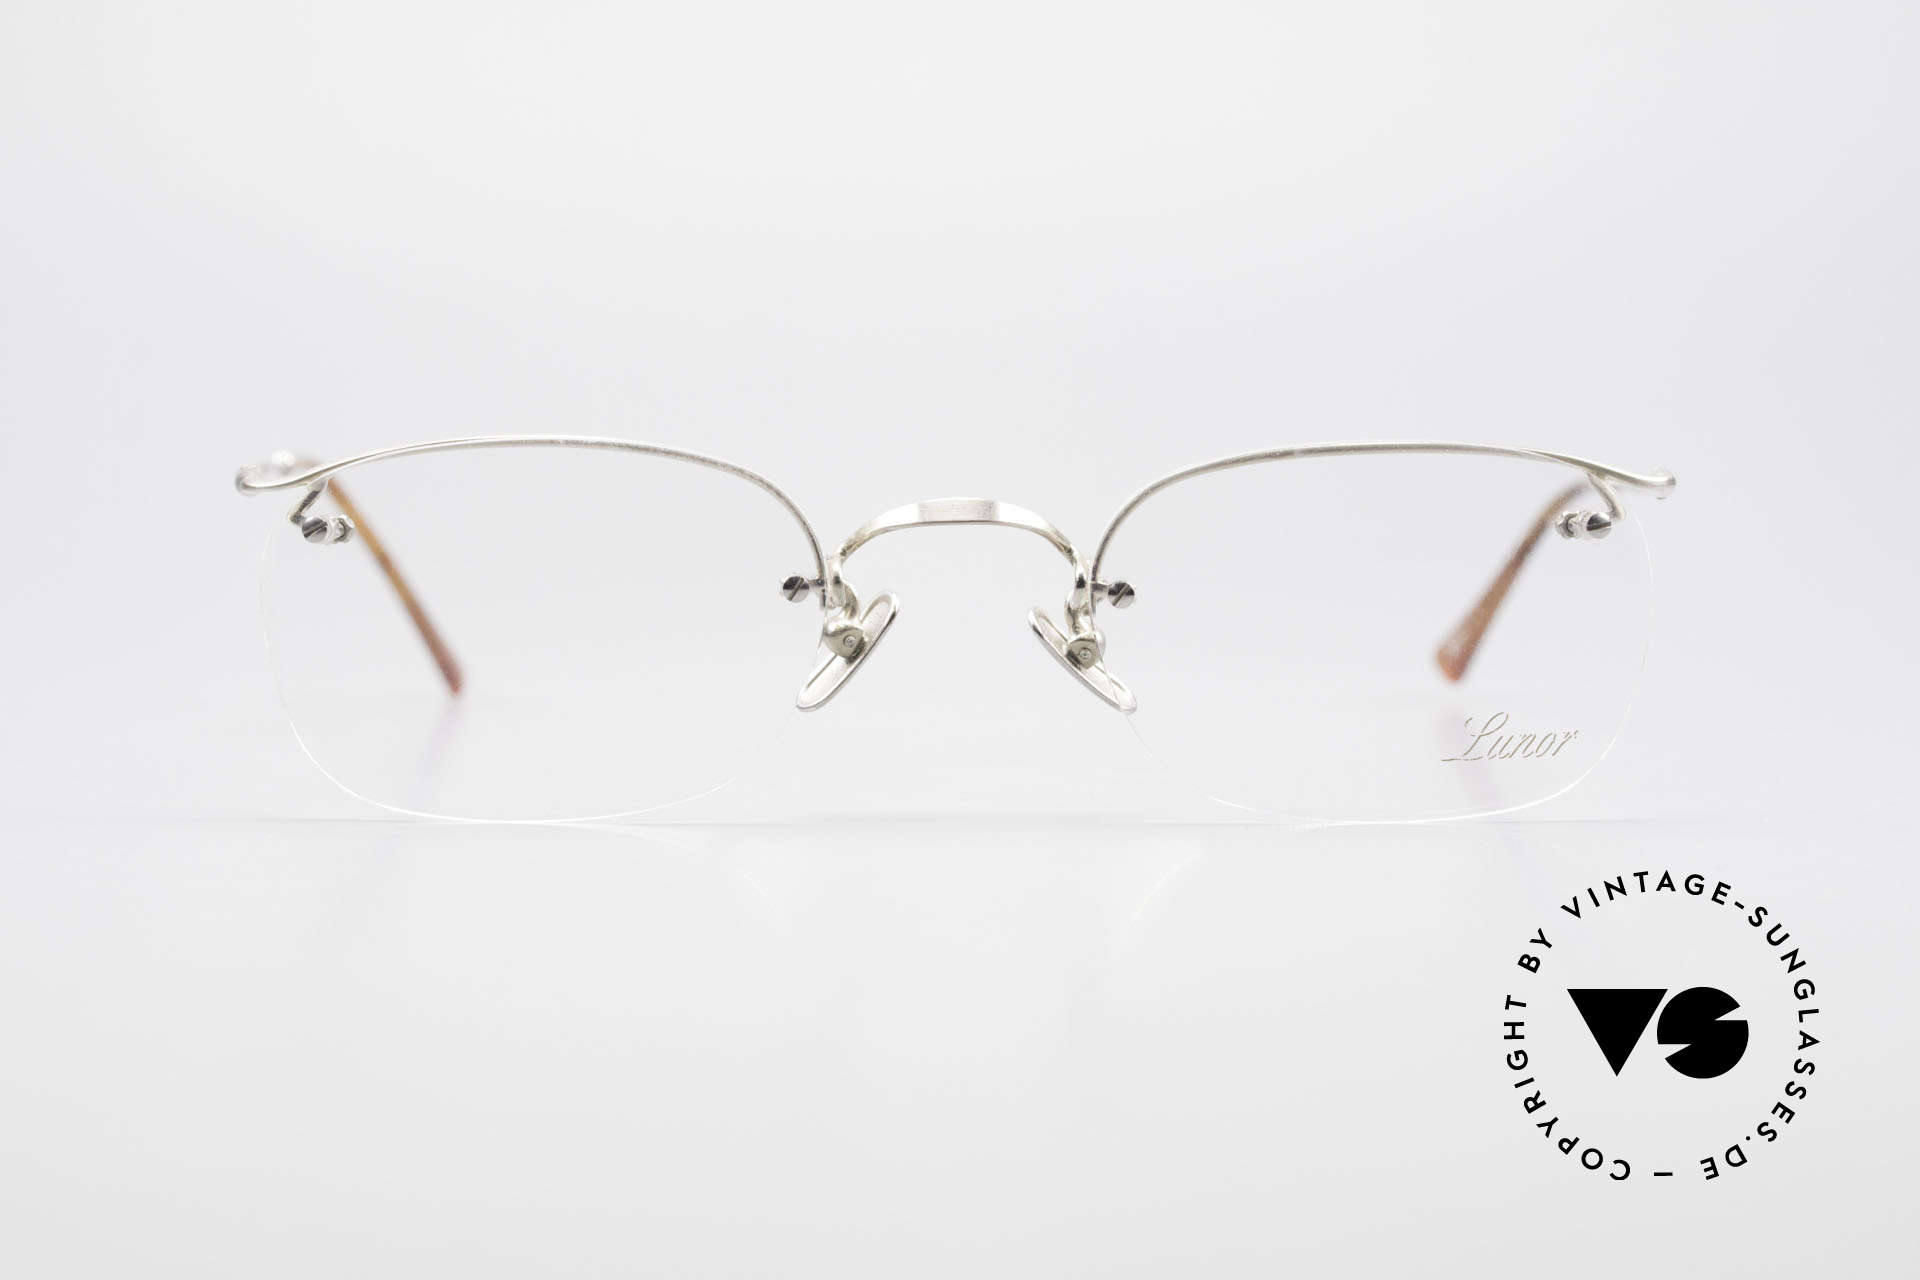 Lunor Classic One Semi Rimless Vintage Glasses, traditional German brand; quality handmade in Germany, Made for Men and Women